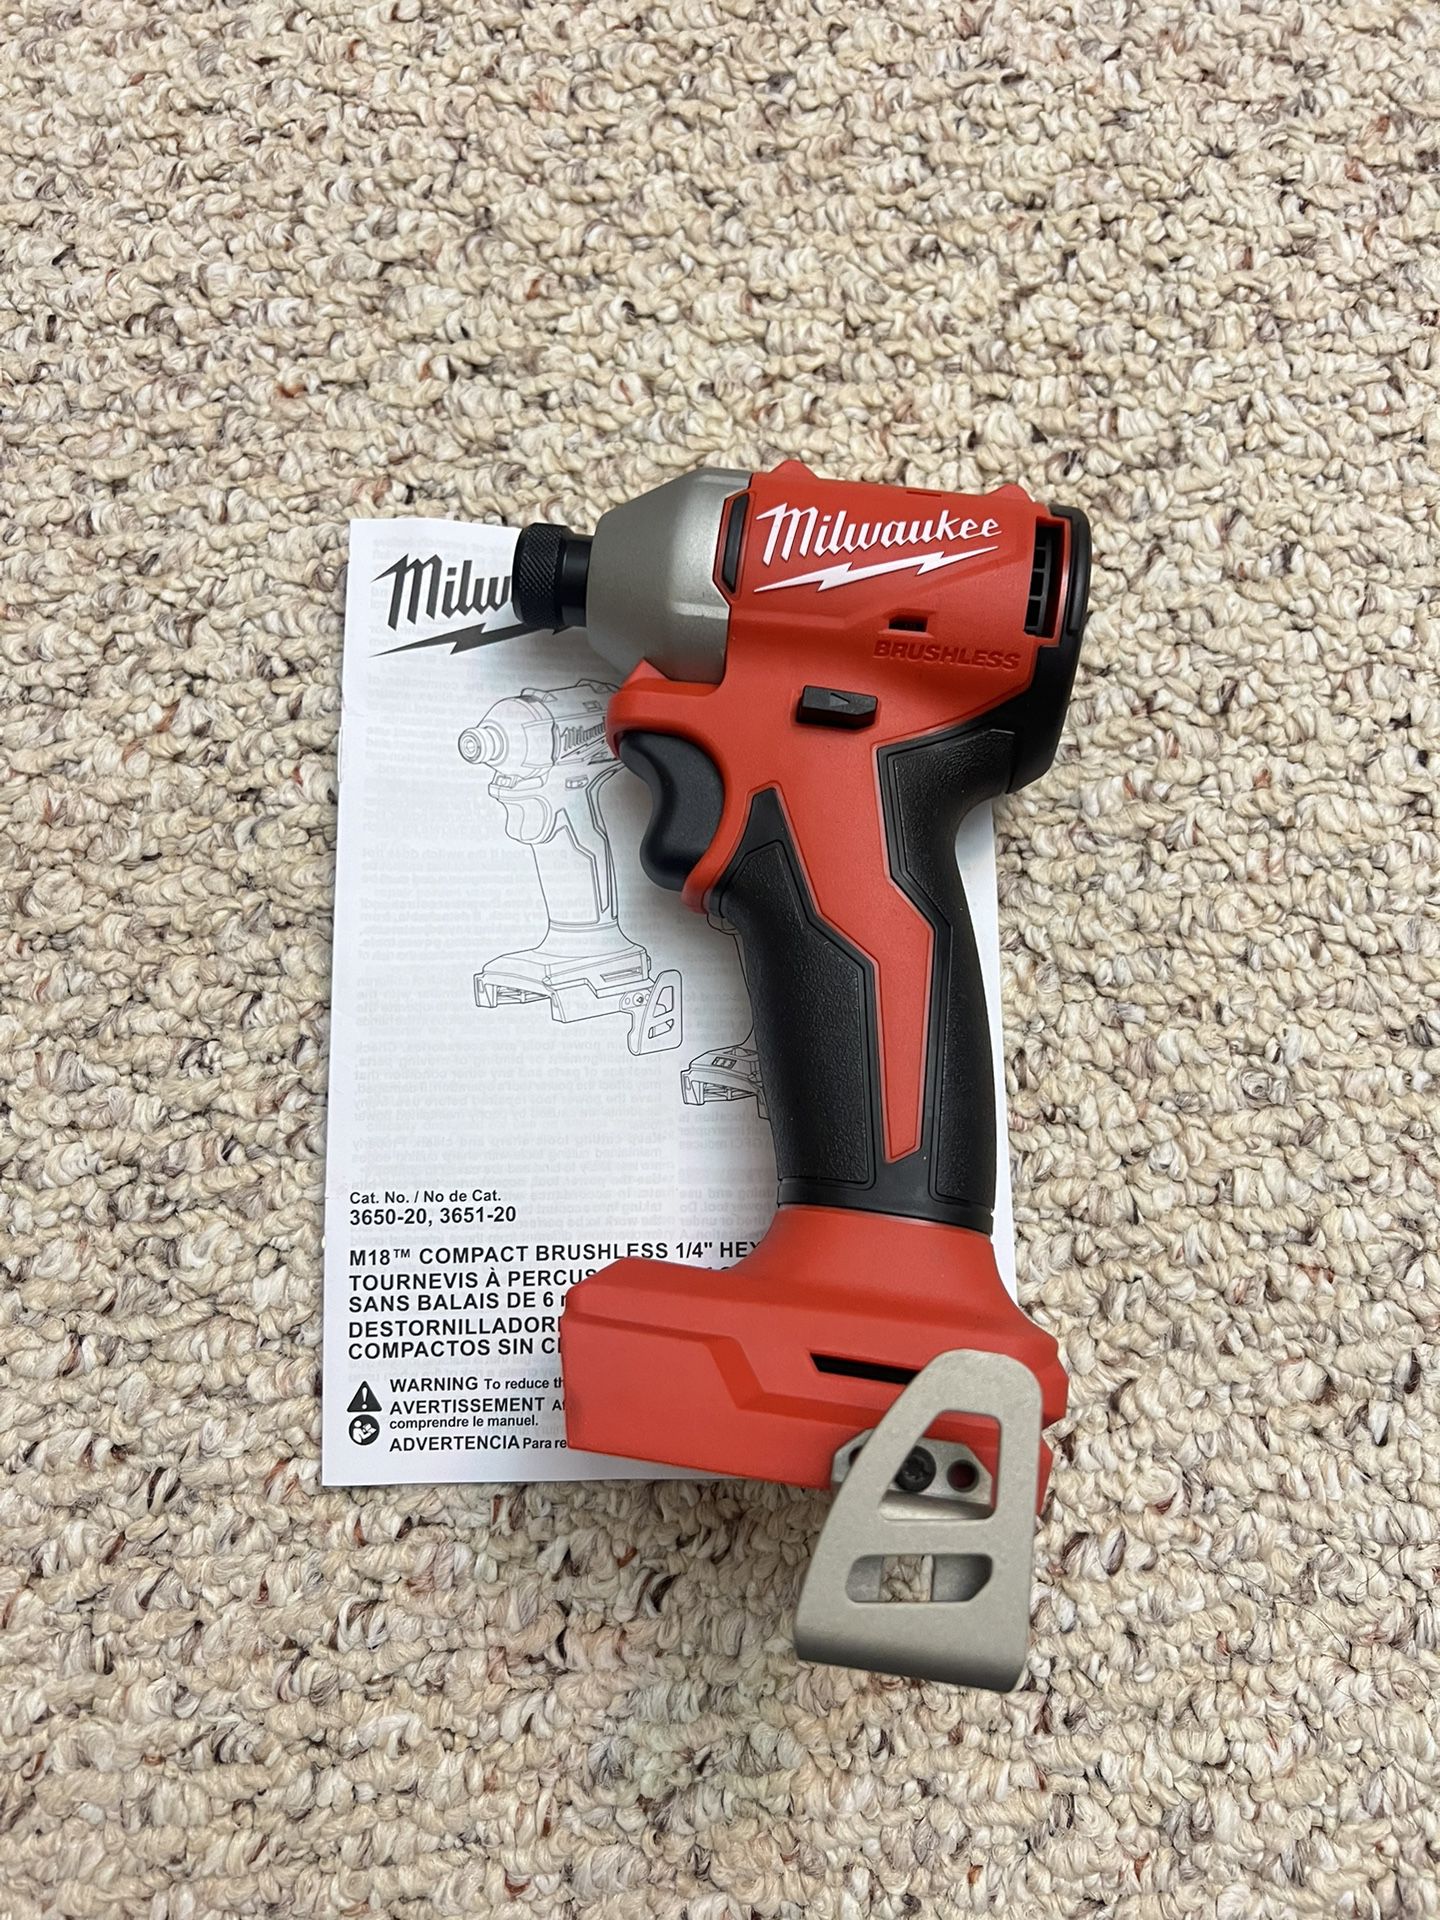 *NEW* Milwaukee M18 Compact Brushless 1/4” Impact Driver (Tool Only)